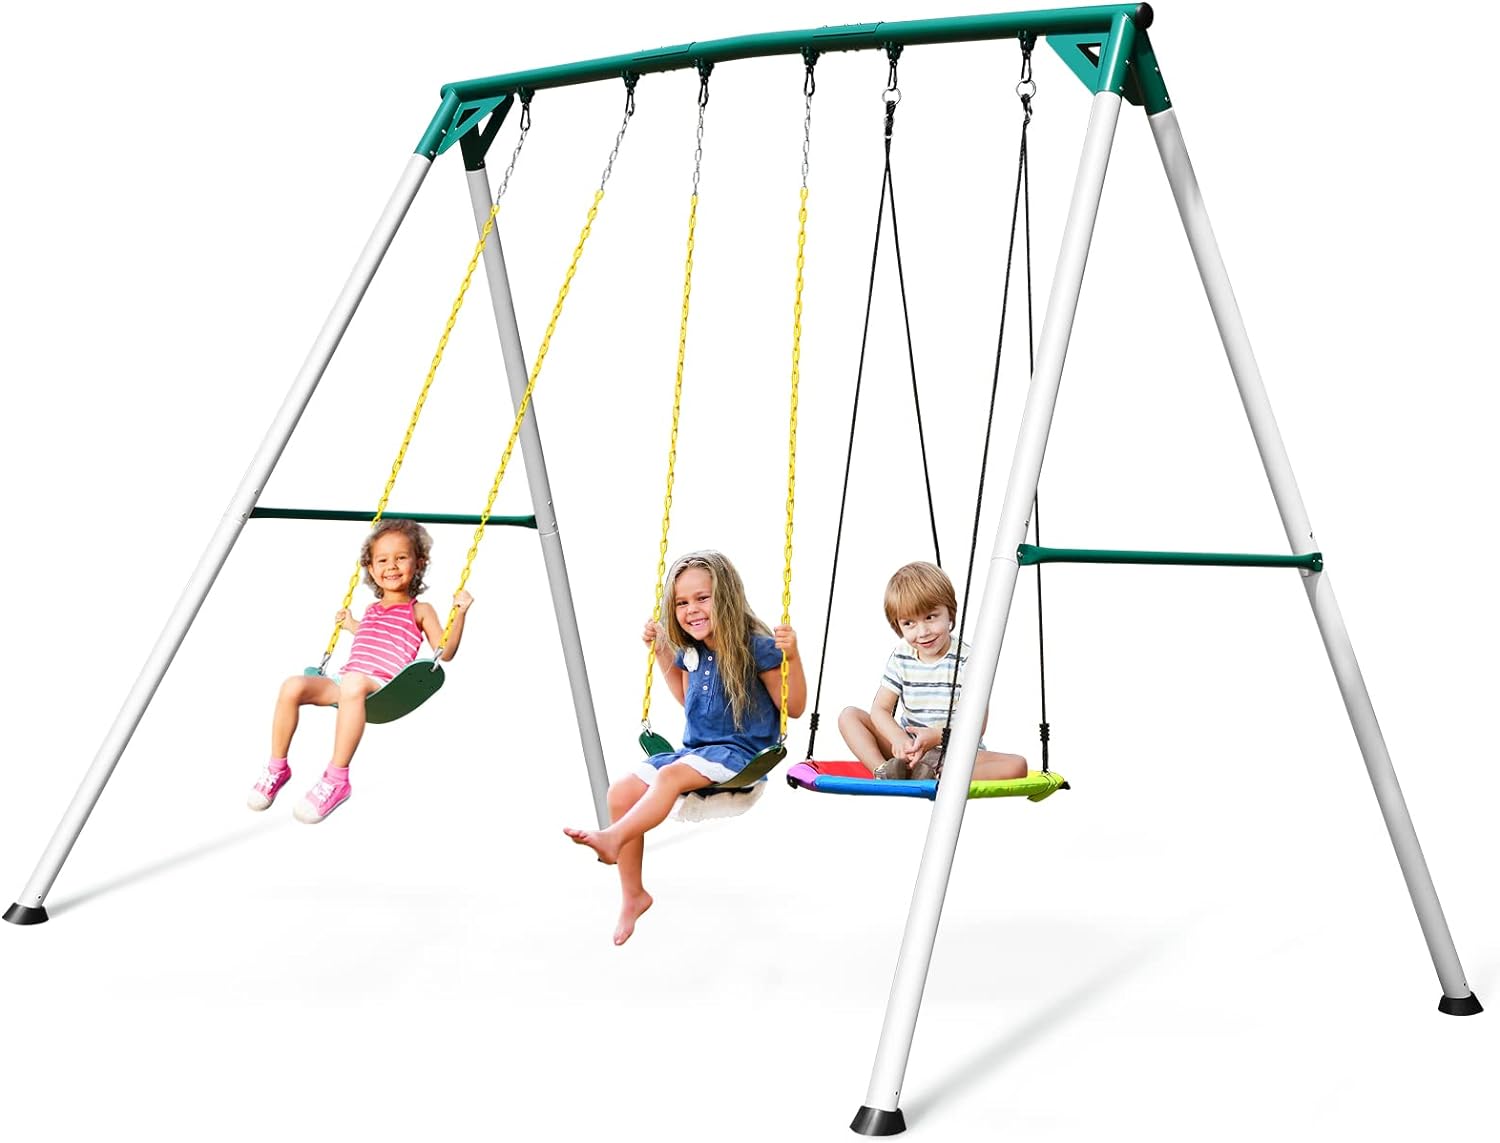 Build the Perfect Swing Set for Your Kids This Year